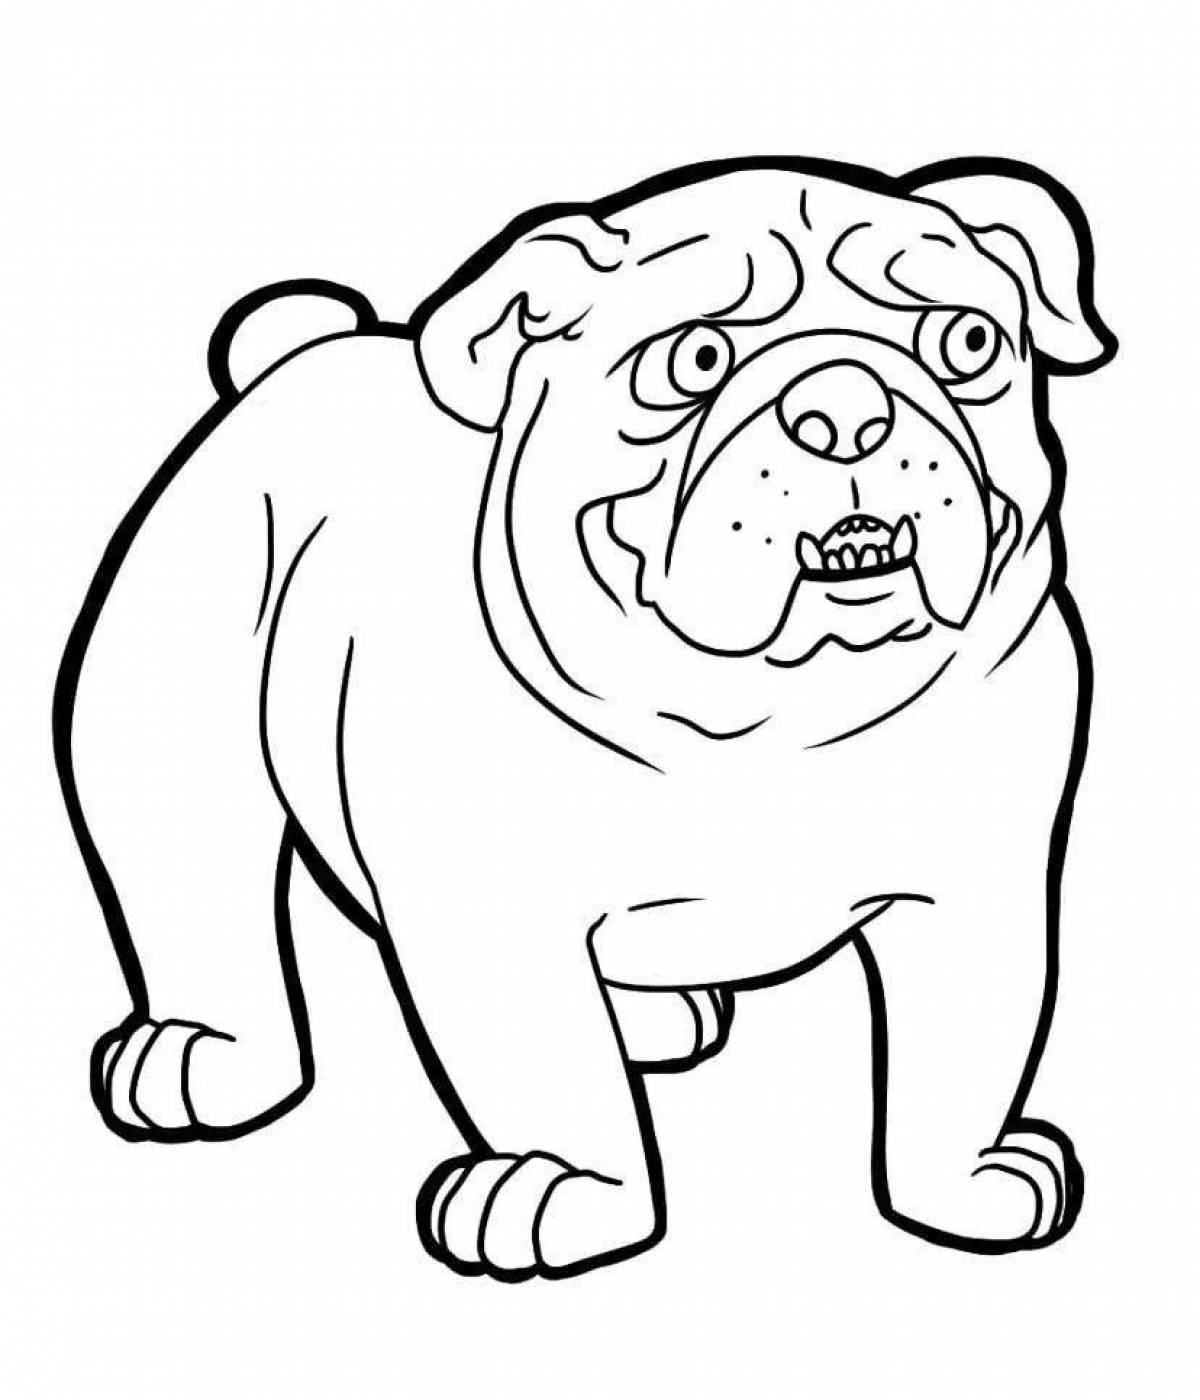 Cute bulldog coloring pages for kids